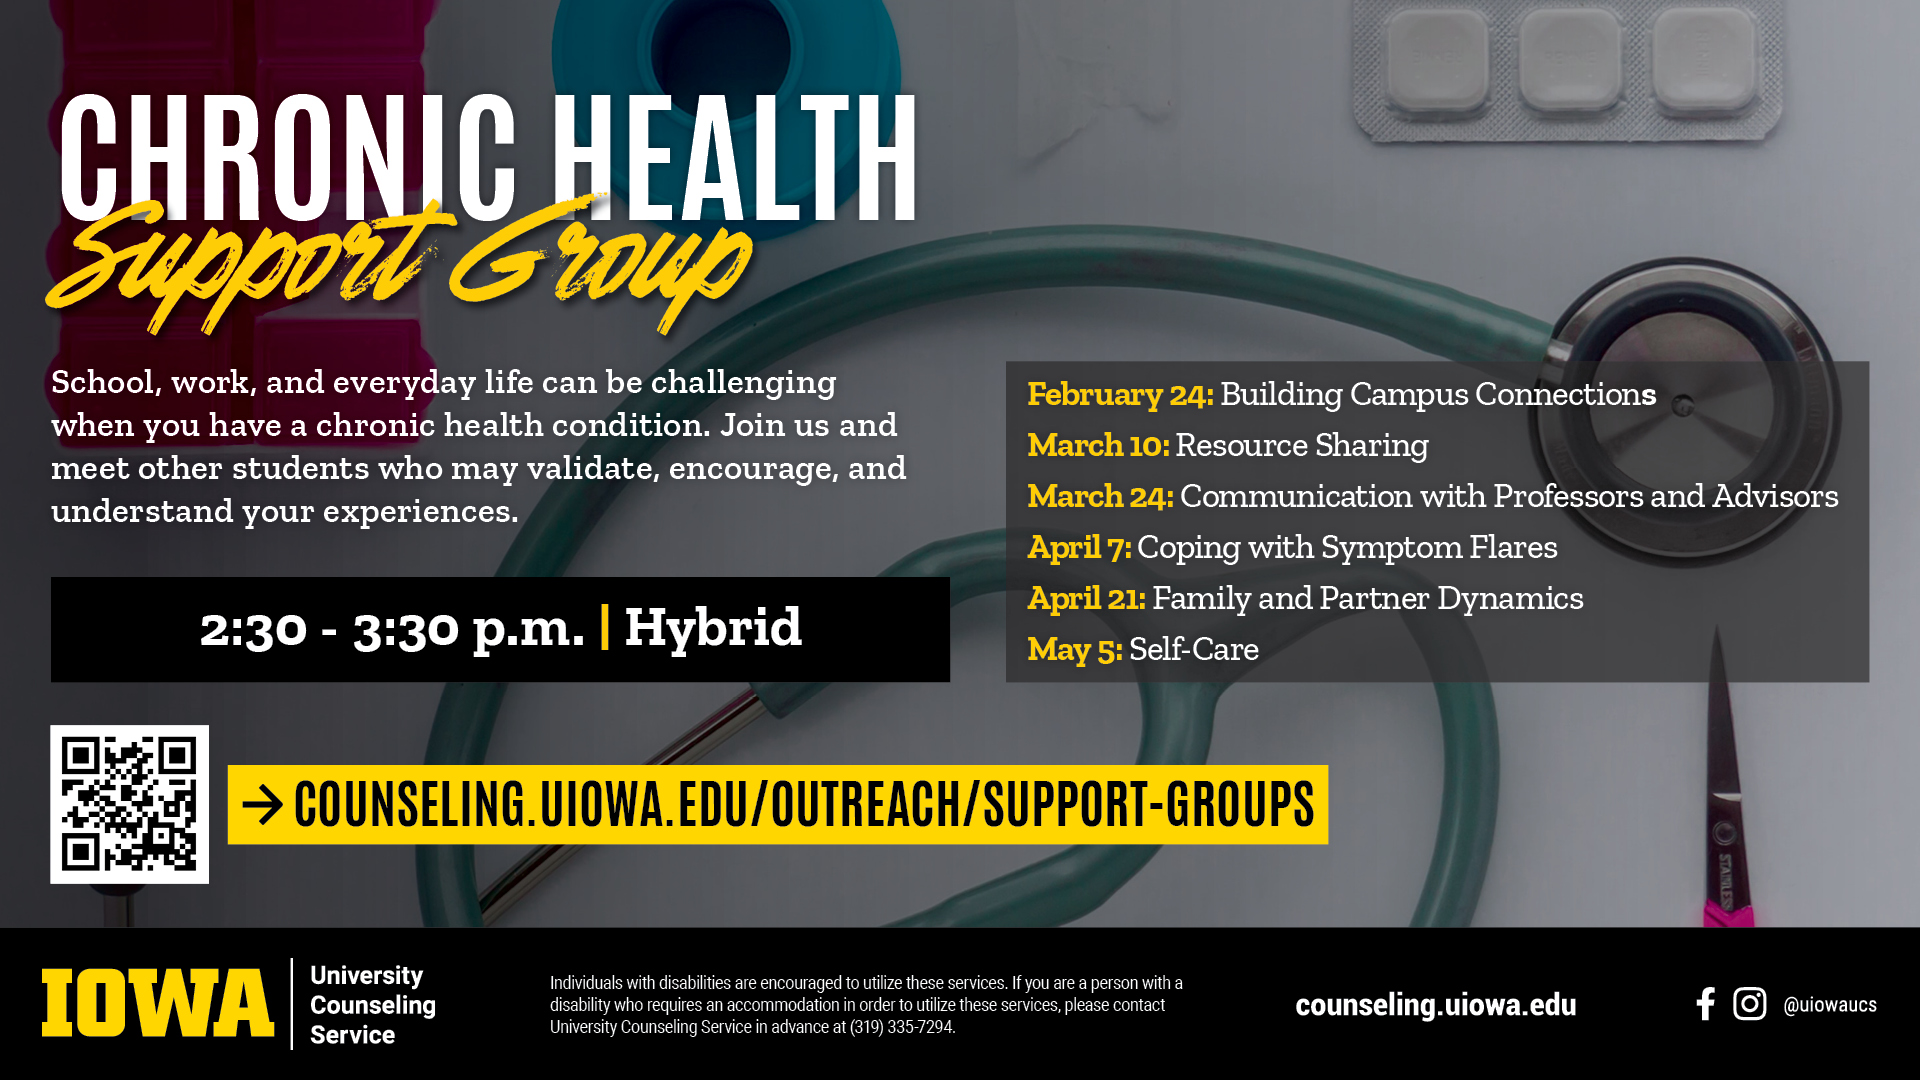 Chronic Health Support Group Feb 24, March 10, March 24, April 7, April 21, May 5 2:30-3:30 hybrid